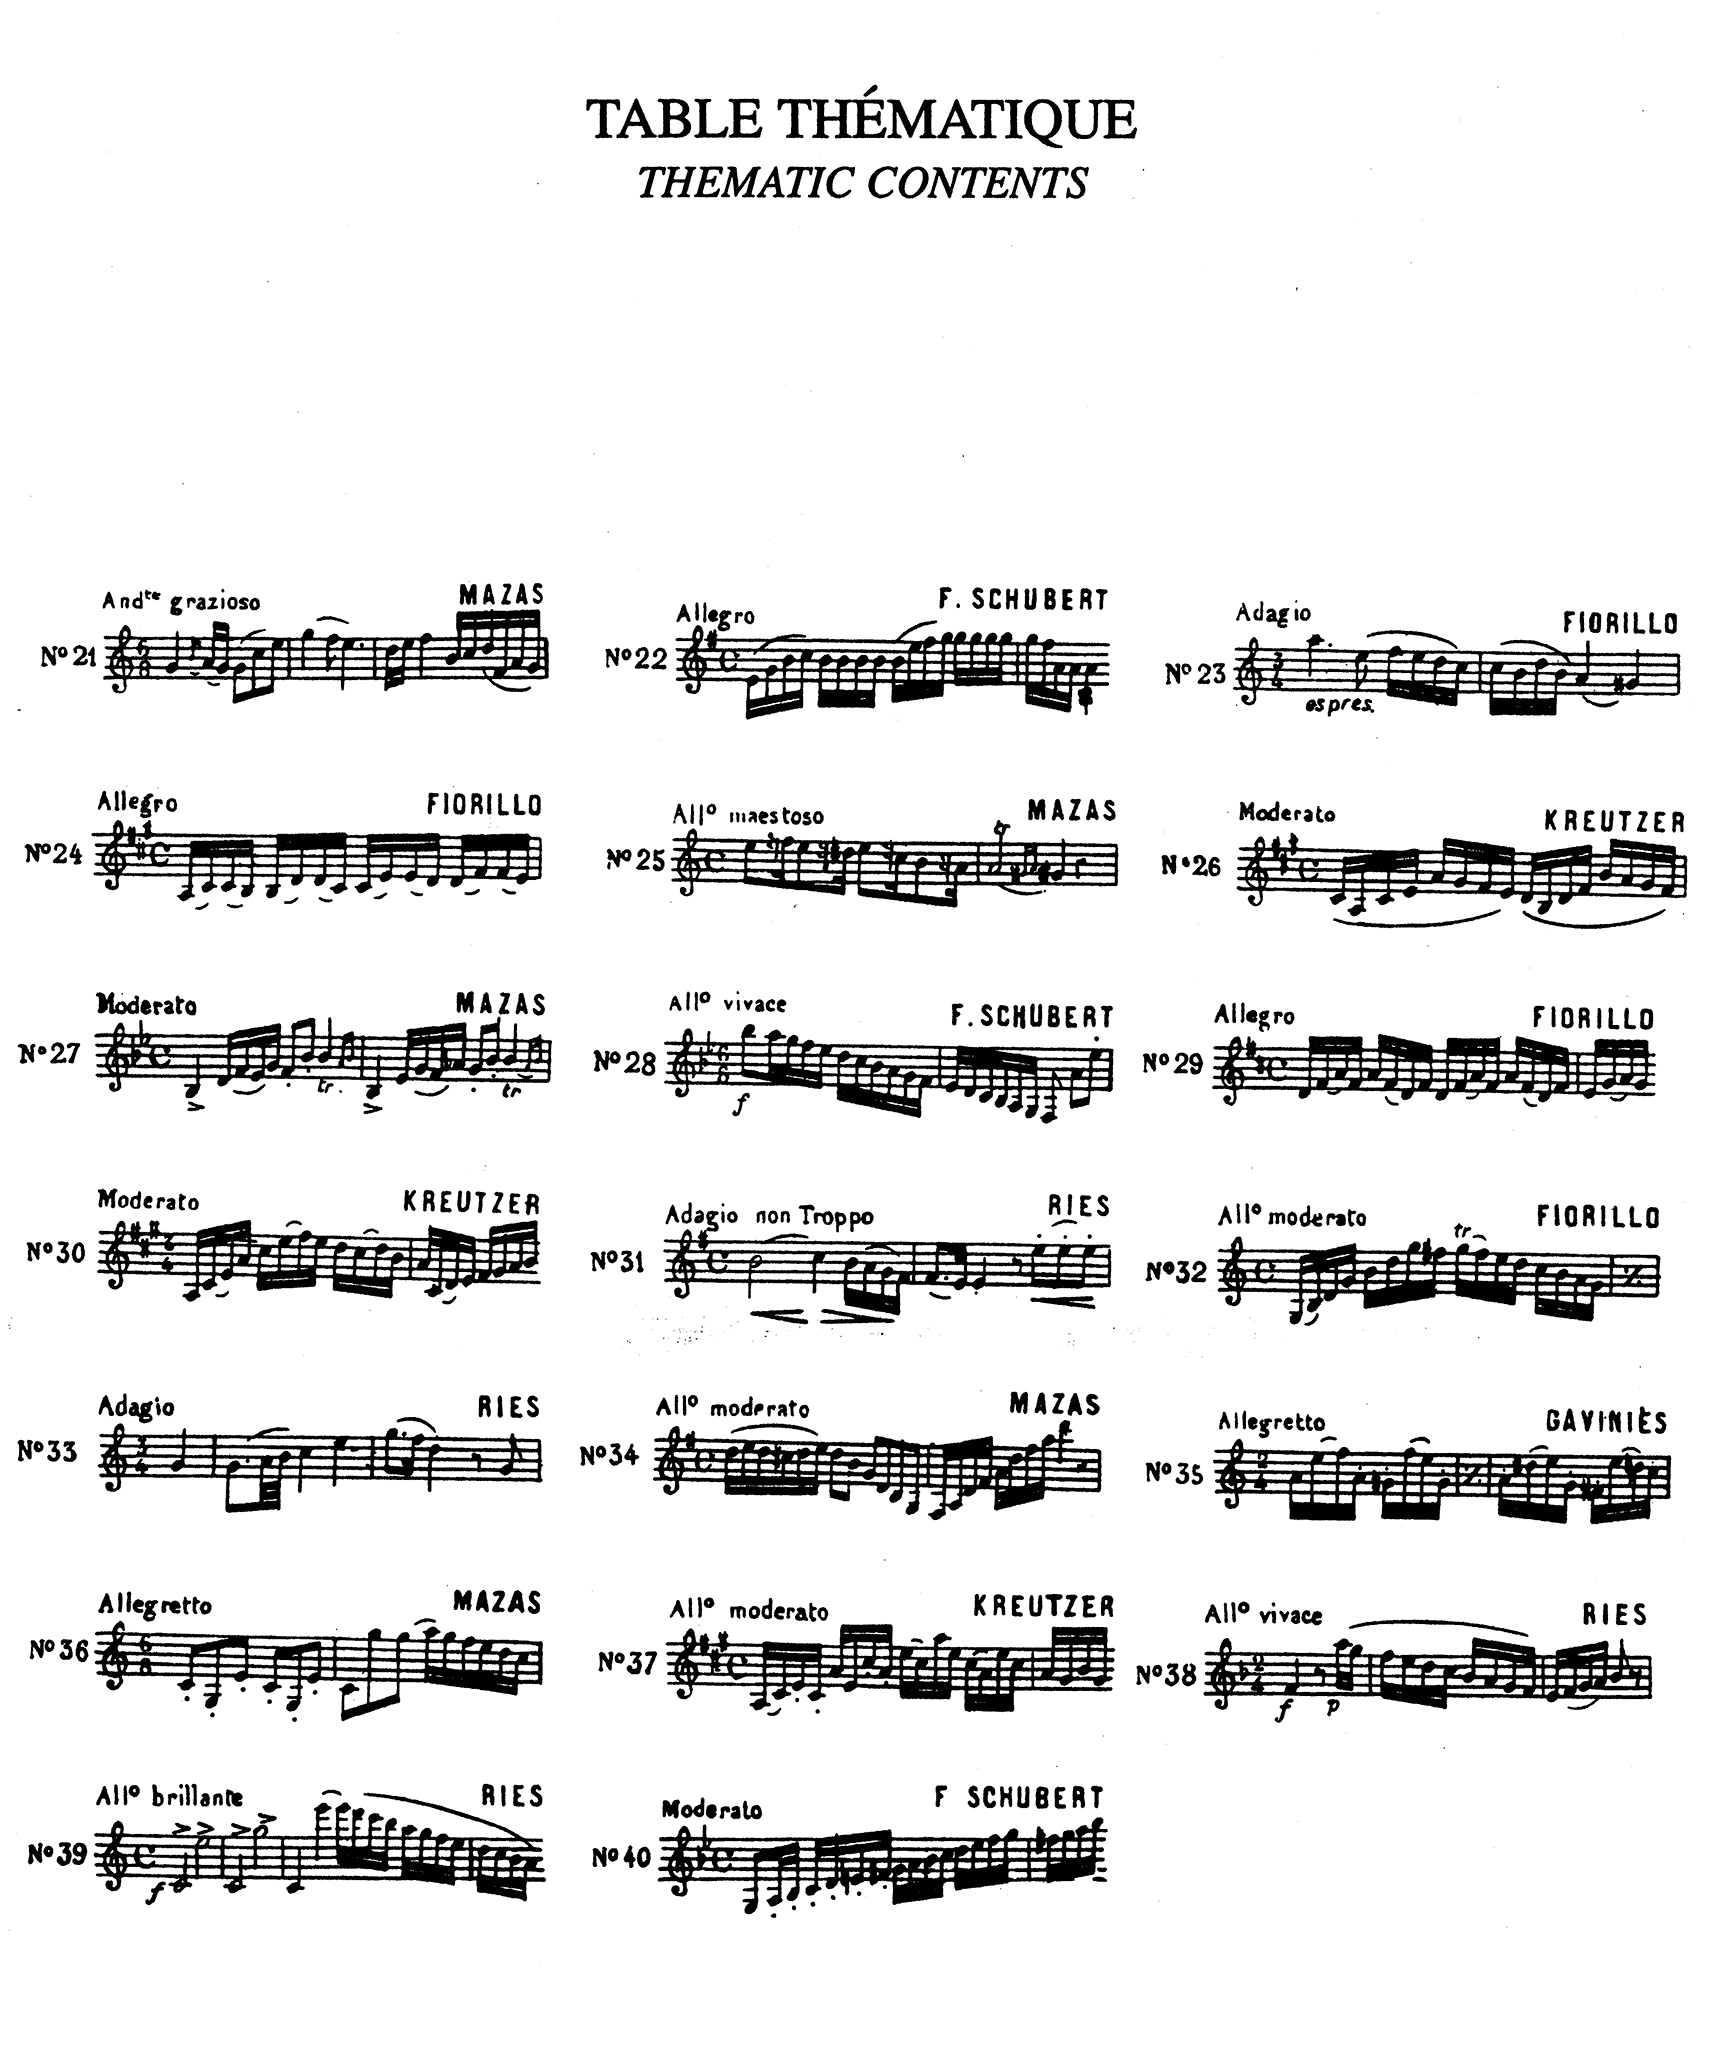 40 Etudes for Clarinet, Book 2 of 2 Thematic index